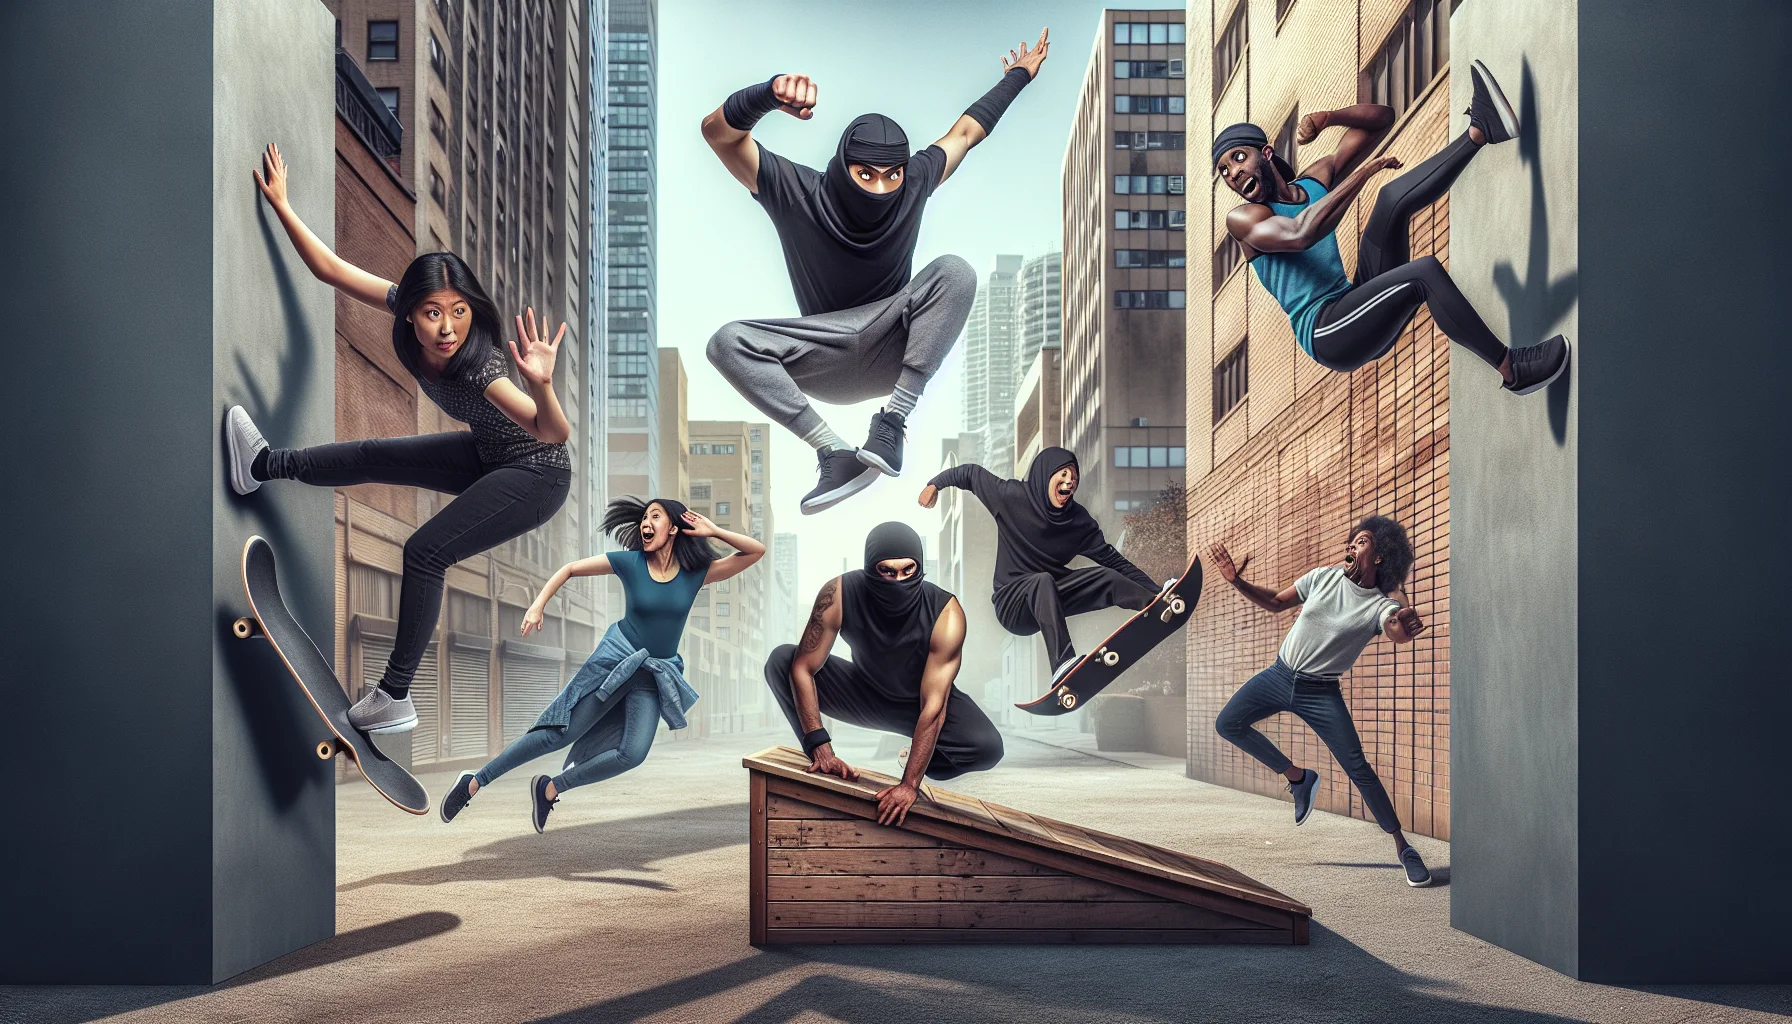 Create a humorous and realistic image featuring a diverse group of parkour practitioners, embodying the spirit of ninjas. The scene showcases a woman of South Asian descent, confidently valiant while jumping over an urban obstacle, a man of Hispanic descent skillfully balancing on a ledge, and a Middle-Eastern woman perform a ninja-like roll. Their movements are fluid and graceful, despite the urban setting's hardness. Last but not least, a black man performs a spectacular backflip, his face reflecting excitement and vitality. This funny scenario is all in the spirit of enticing people of all ages and backgrounds to engage in physical exercise.